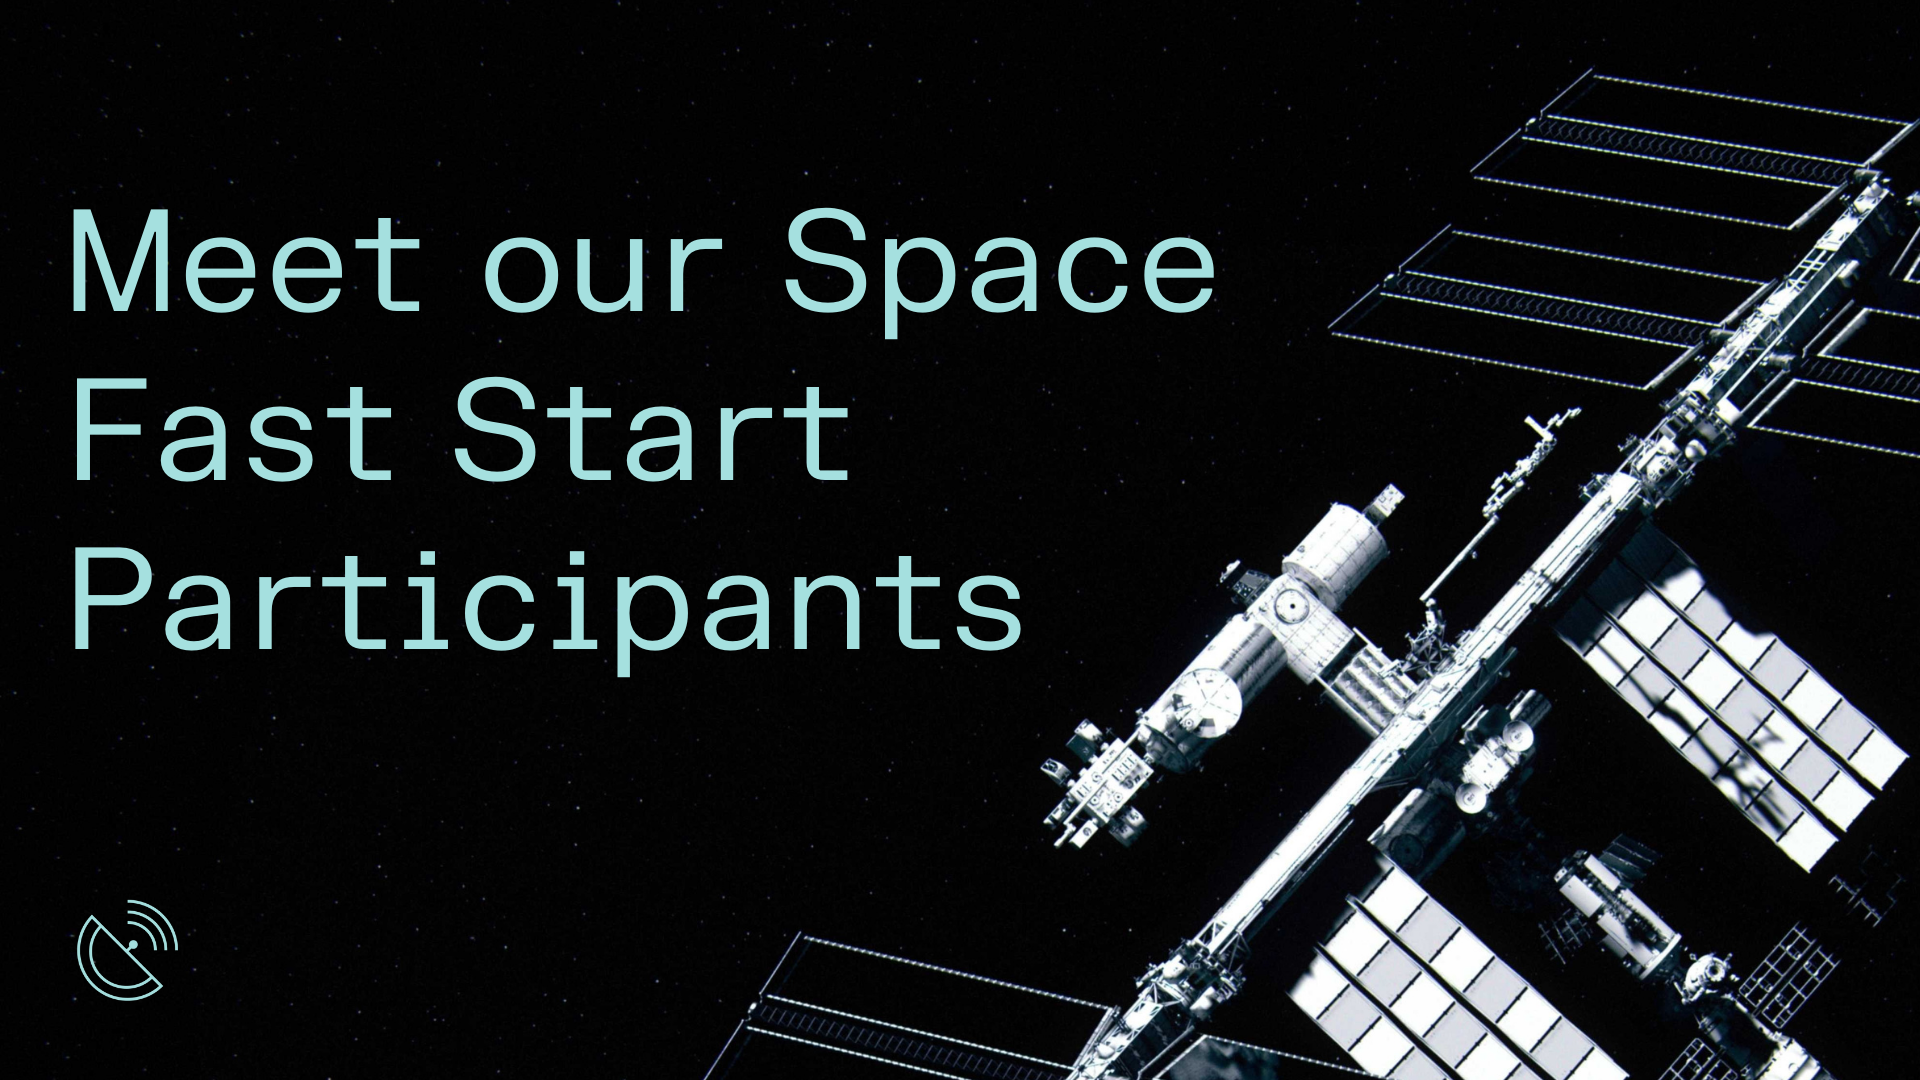 New year, new space game-changers - Meet our space fast start participants